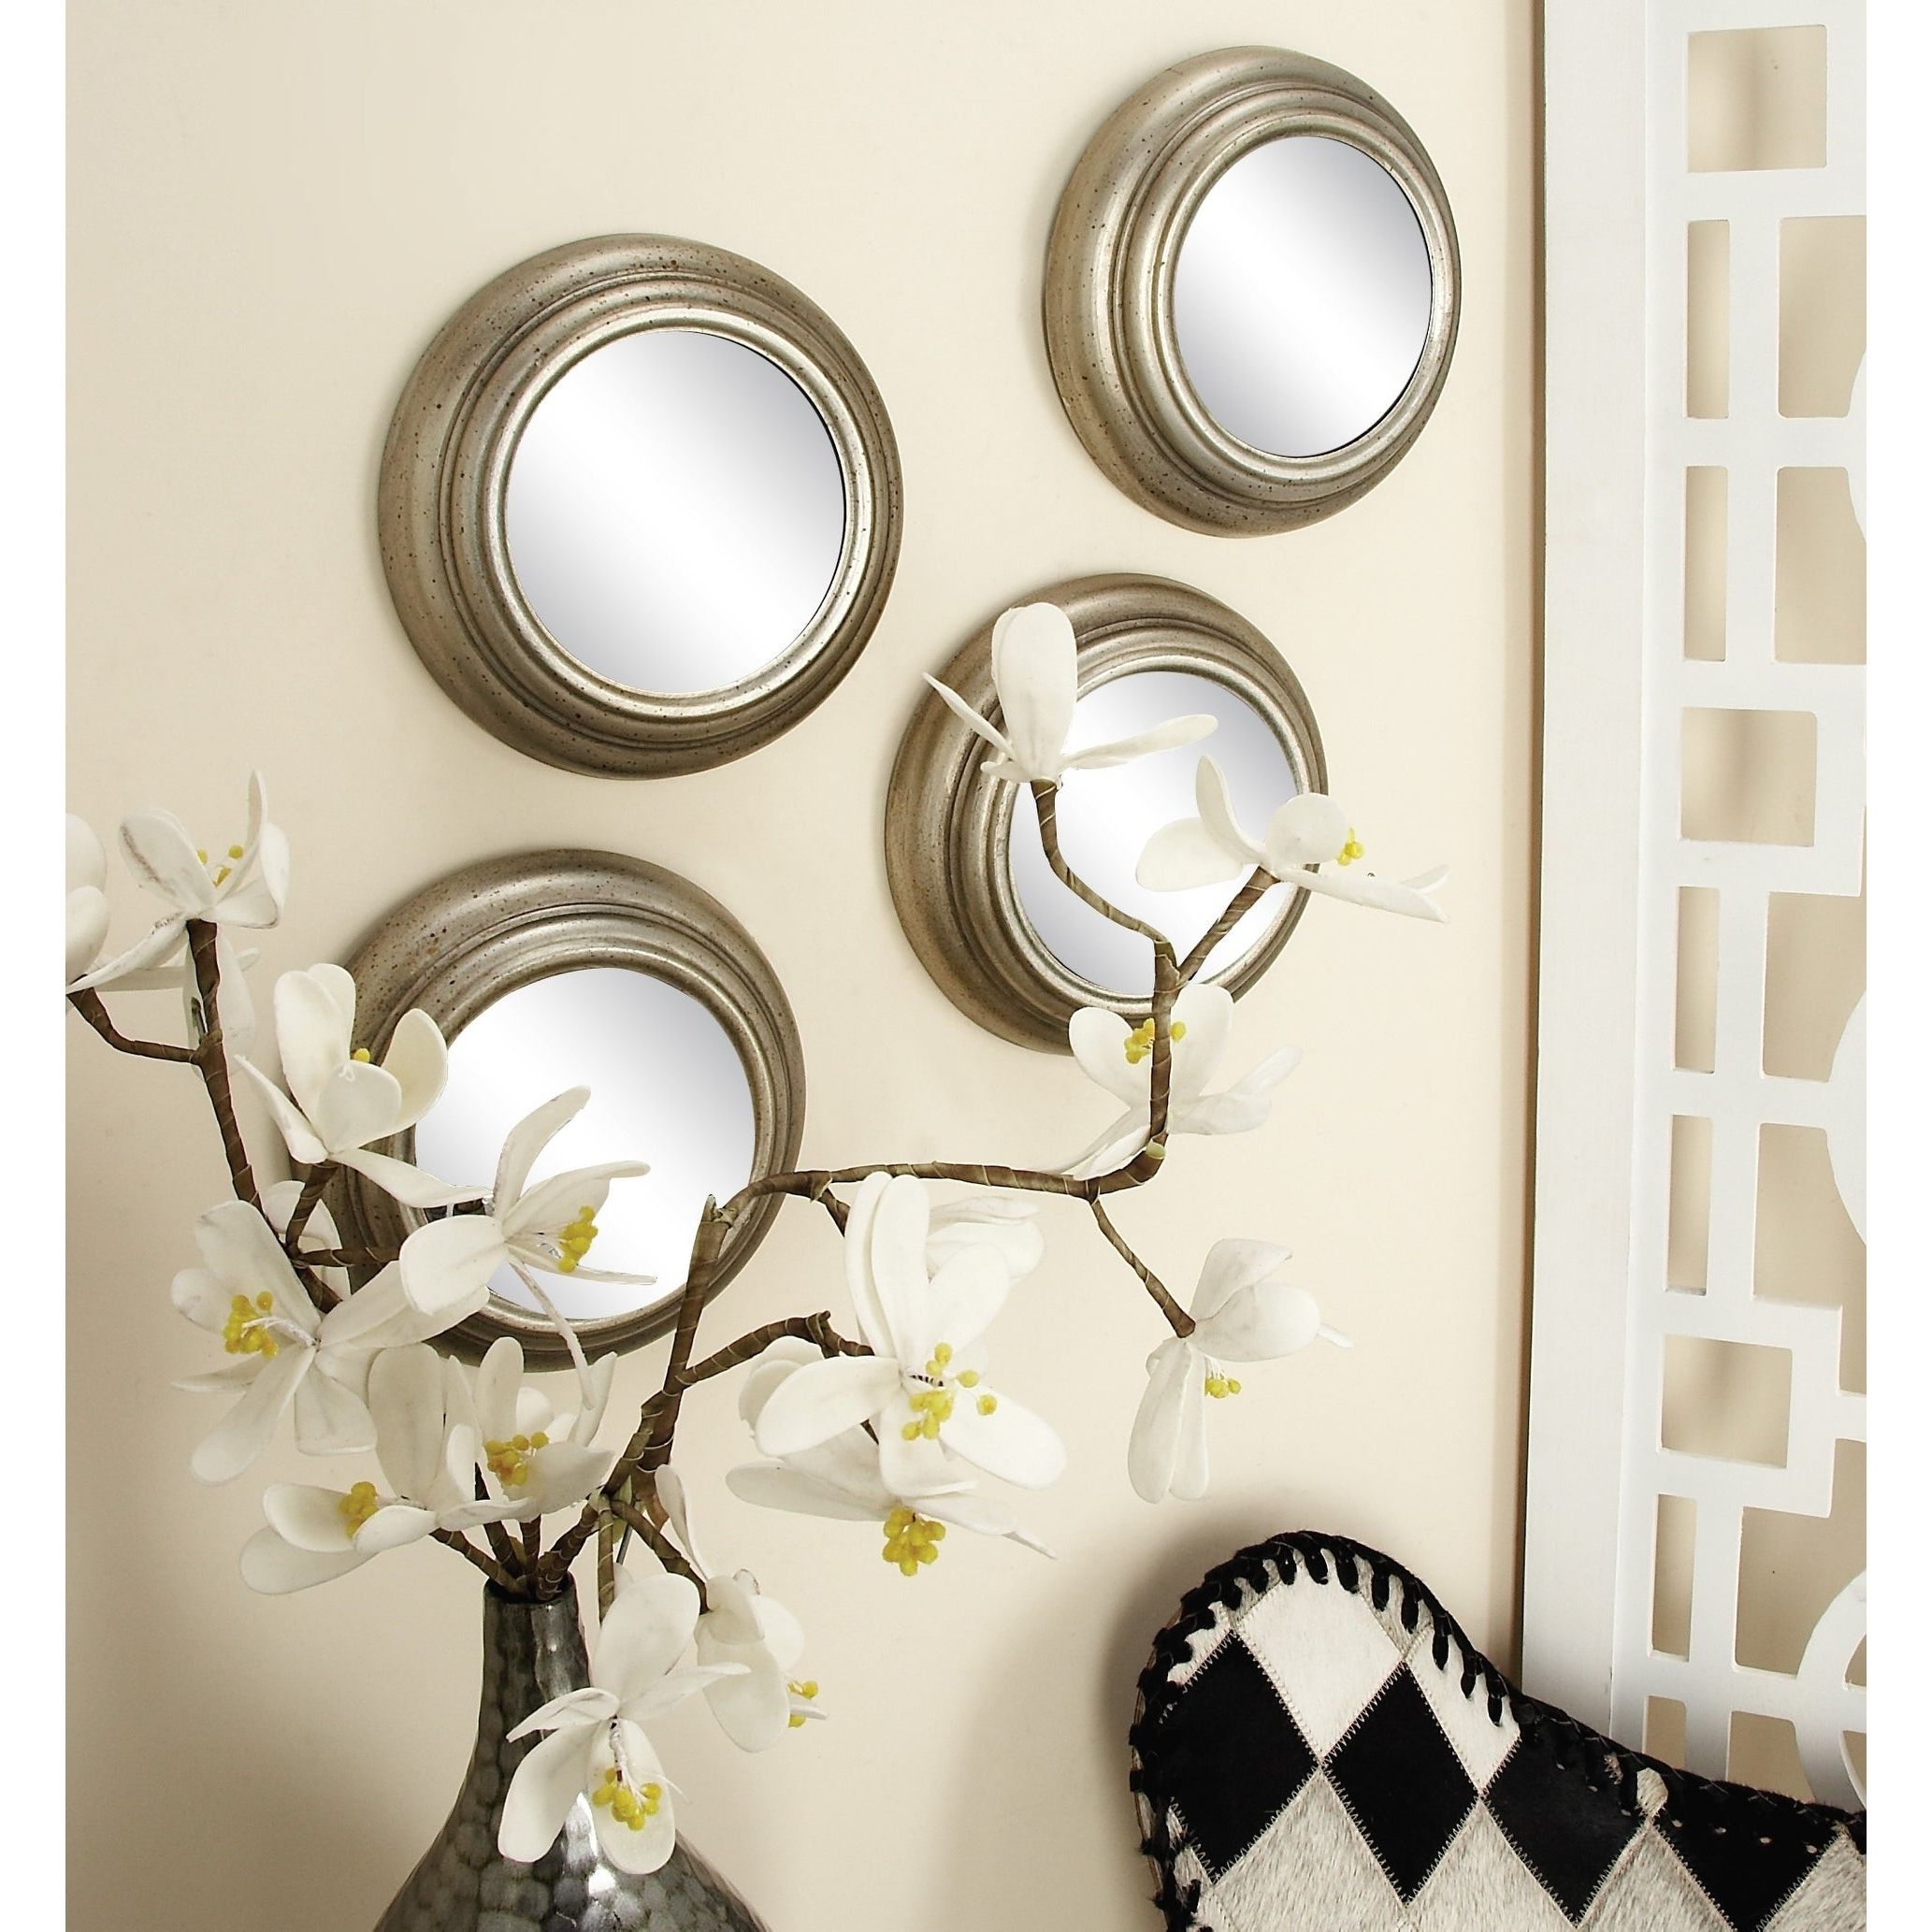 Best And Newest Set Of 12 Contemporary Round Decorative Wall Mirrorsstudio 350 – Silver With Decorative Round Wall Mirrors (View 7 of 20)